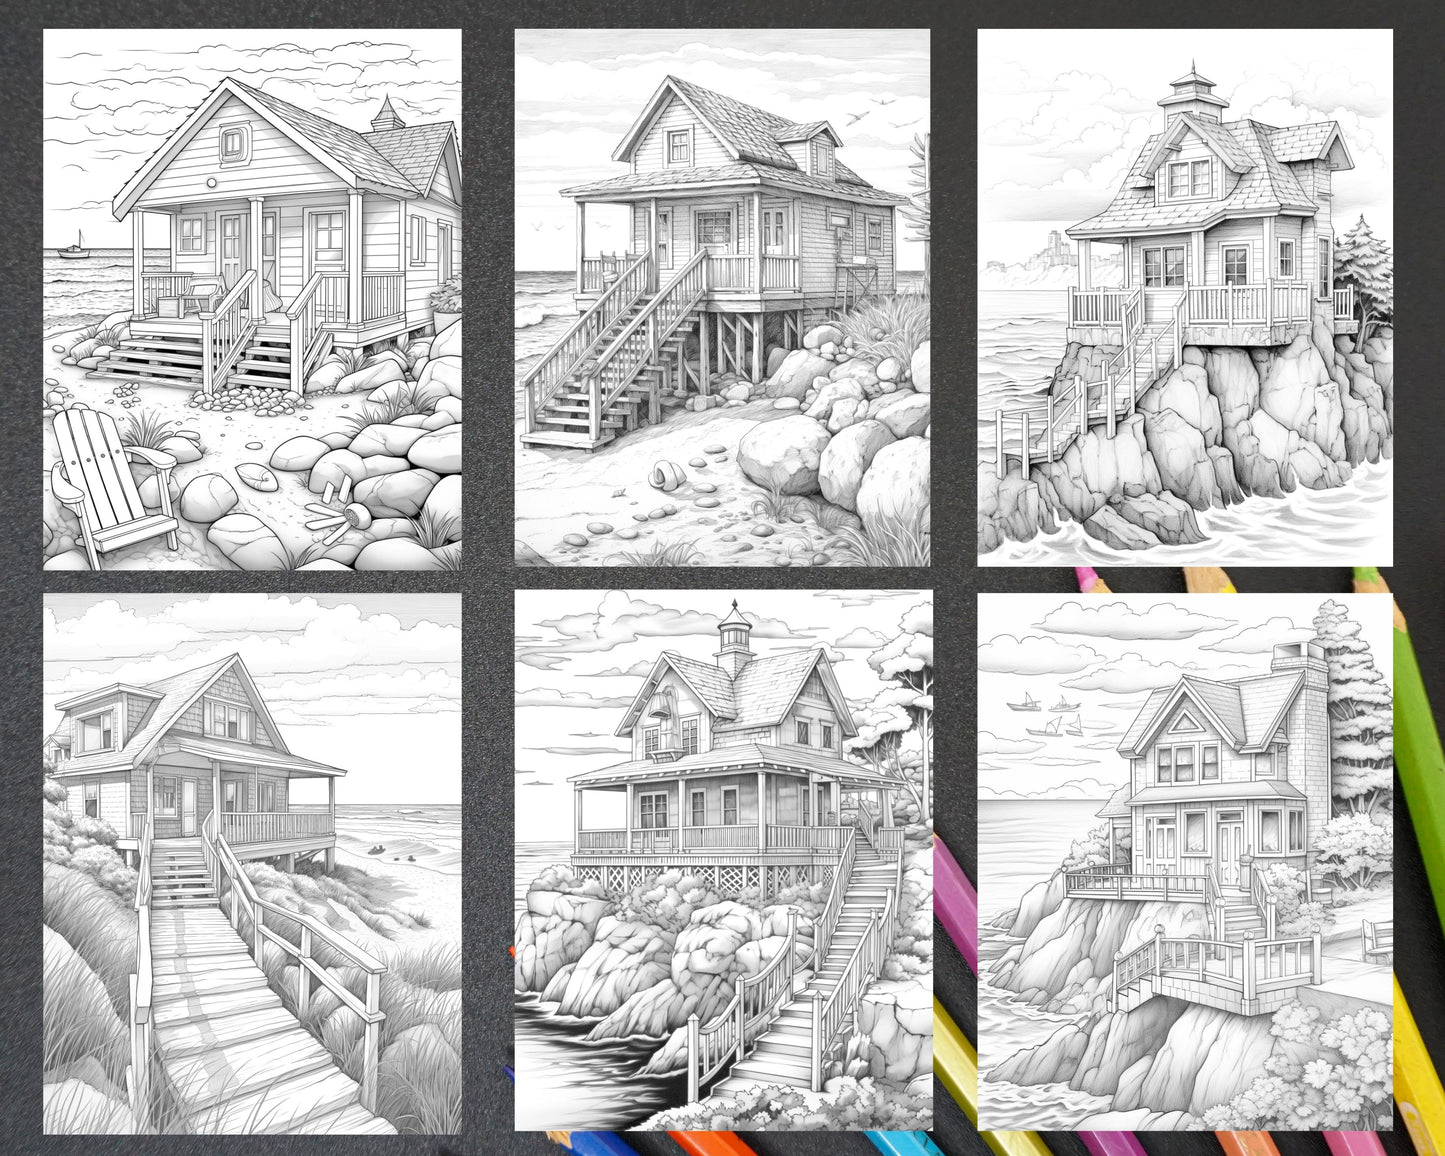 grayscale coloring page with wooden beach house, printable adult coloring page - beach houses